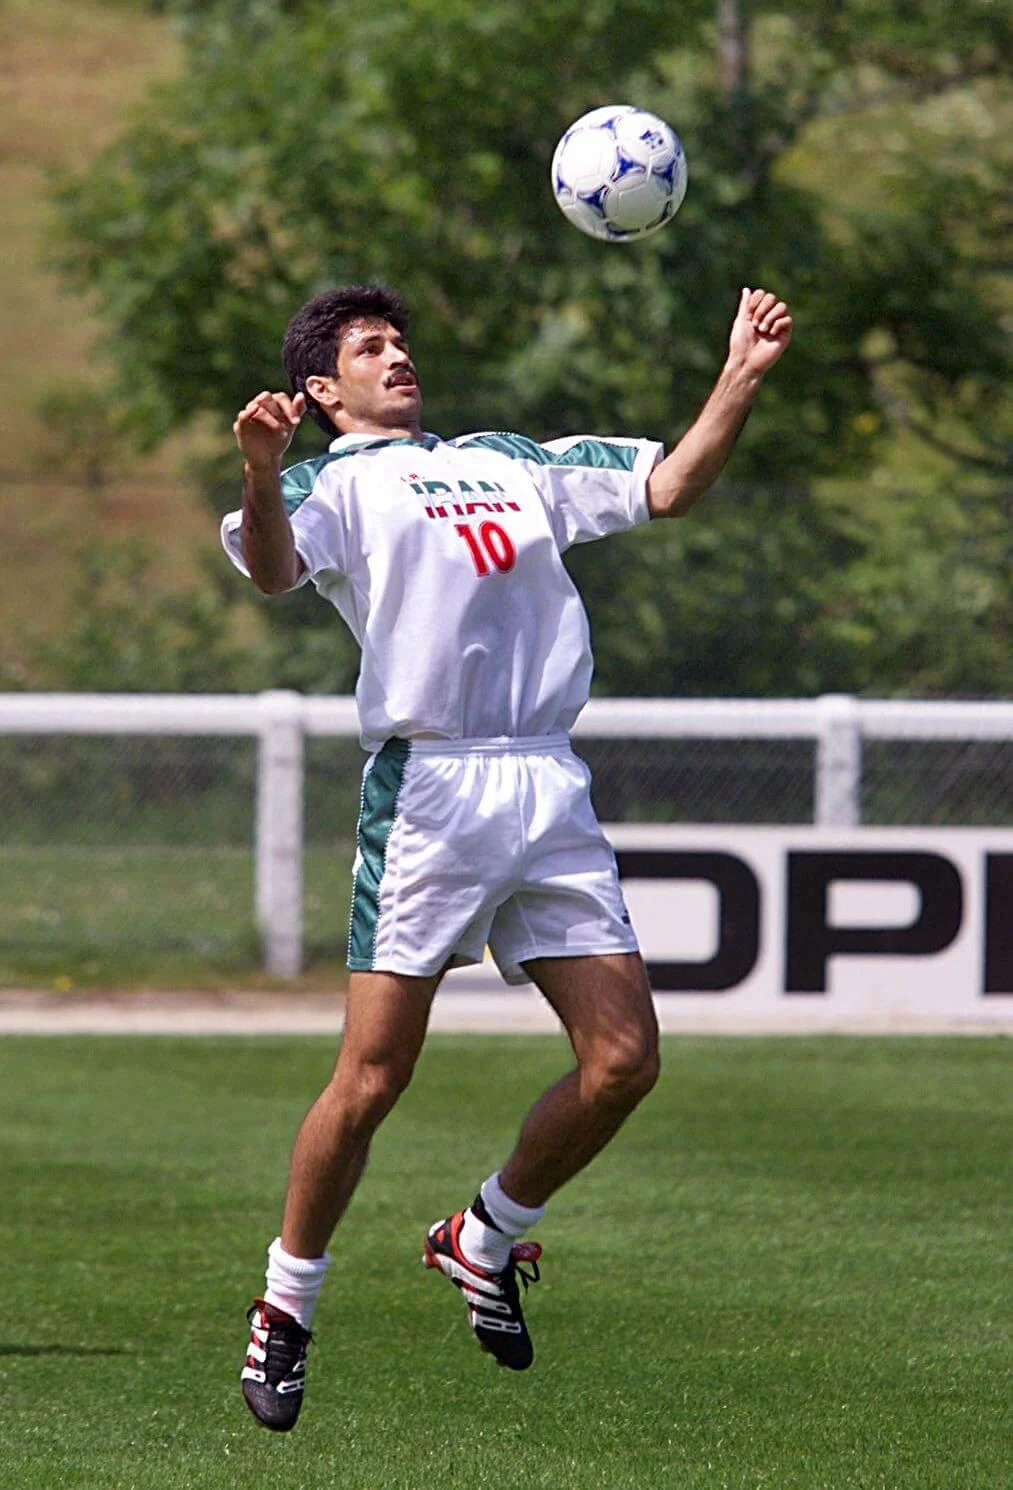 Star of the Iranian national soccer team Ali Daei plays with the ball 09 June at the Yssingeaux stadium, center France, during a training session. Iran, who will play in group F, will play against Yugoslavia 14 June in Saint-Etienne, center France. . (ELECTRONIC IMAGE) (Photo by Eric Feferberg / AFP)